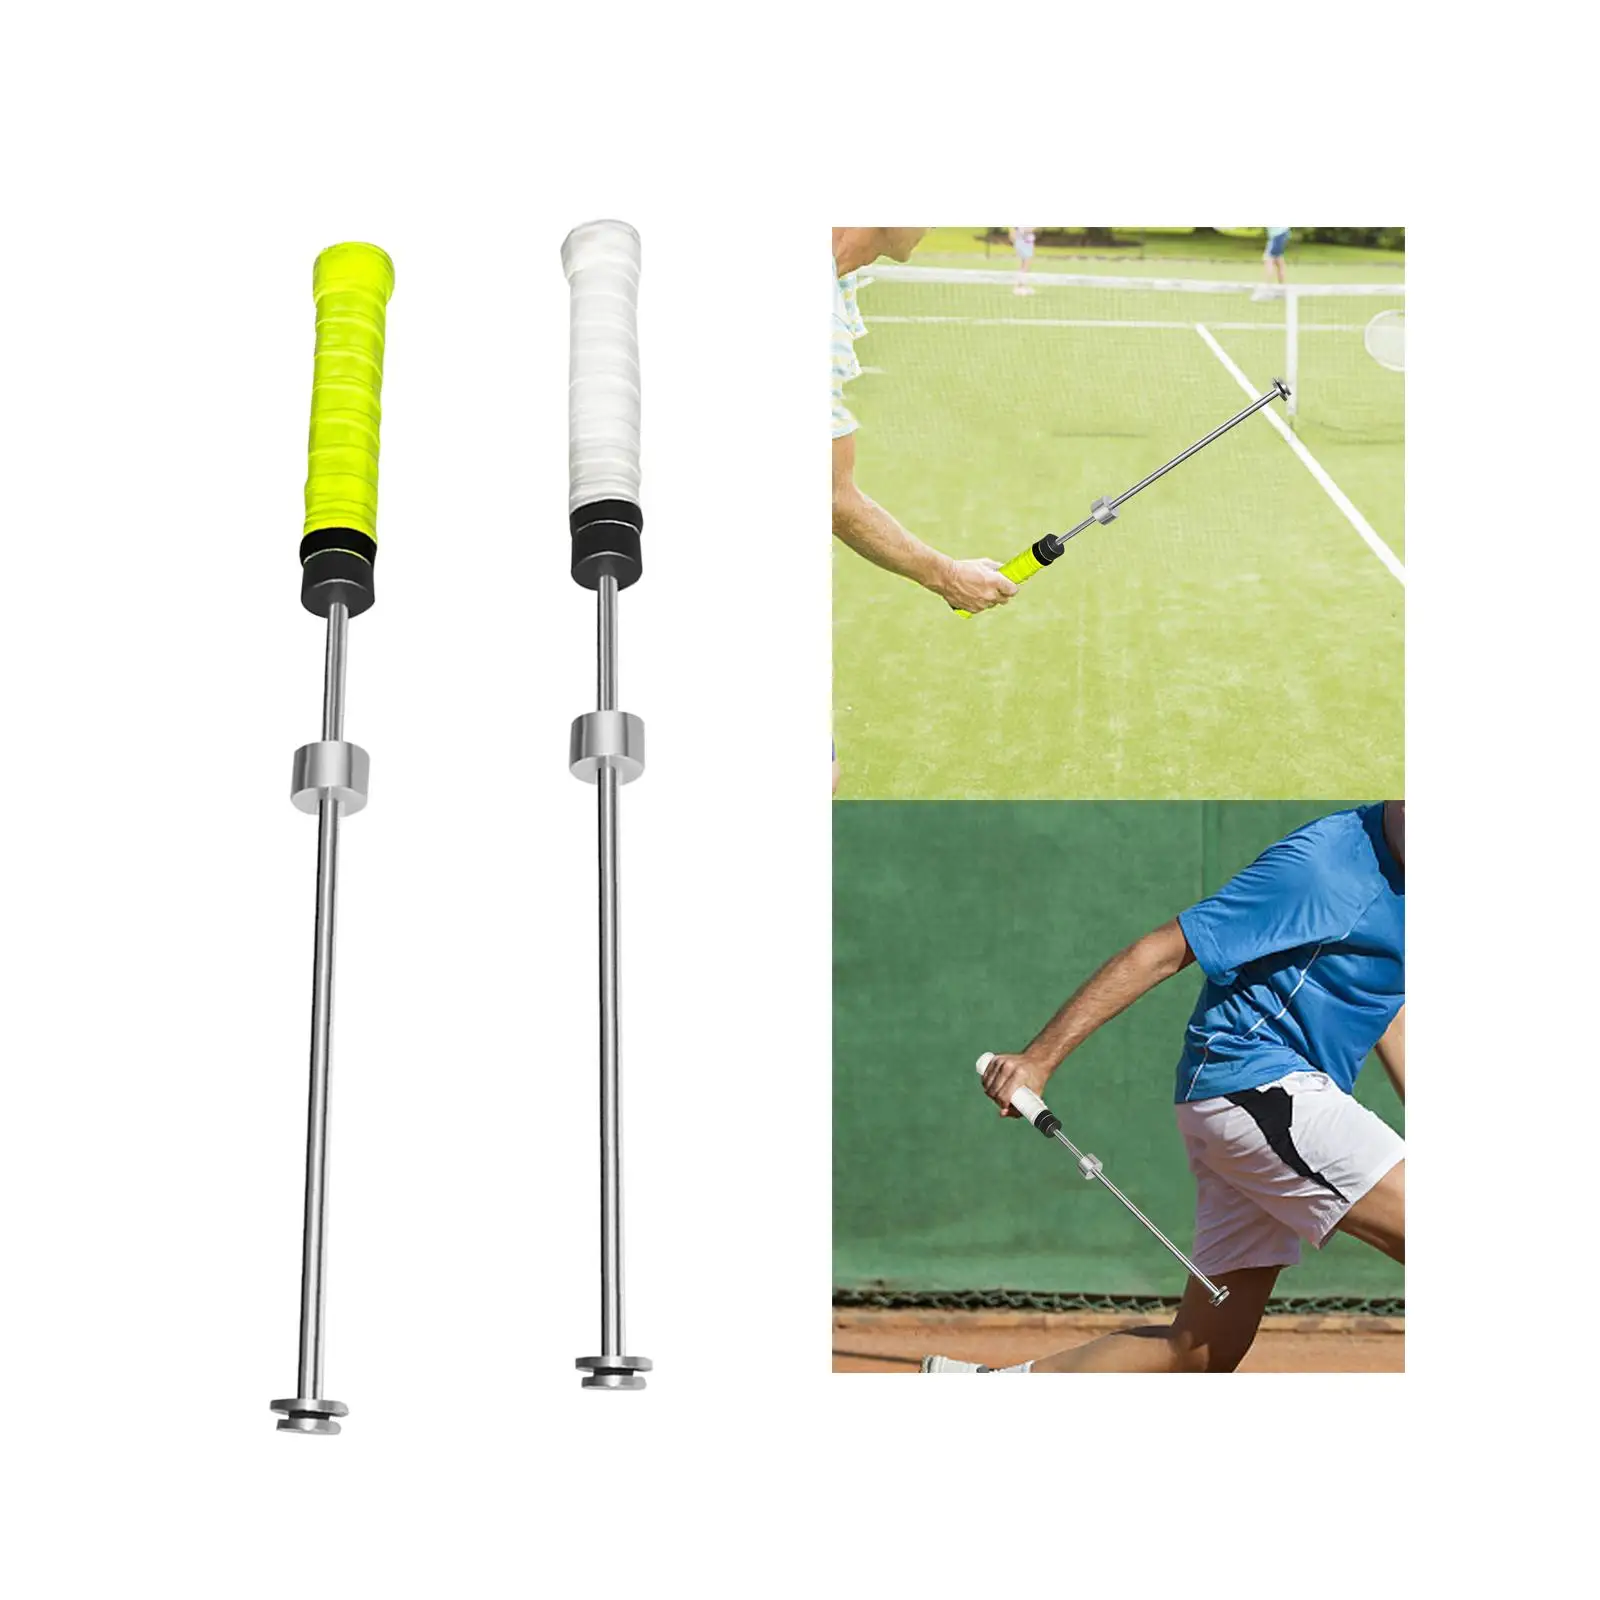 Tennis Swing Trainer Aid Practicing Guide Posture Adjustment Sound Remind